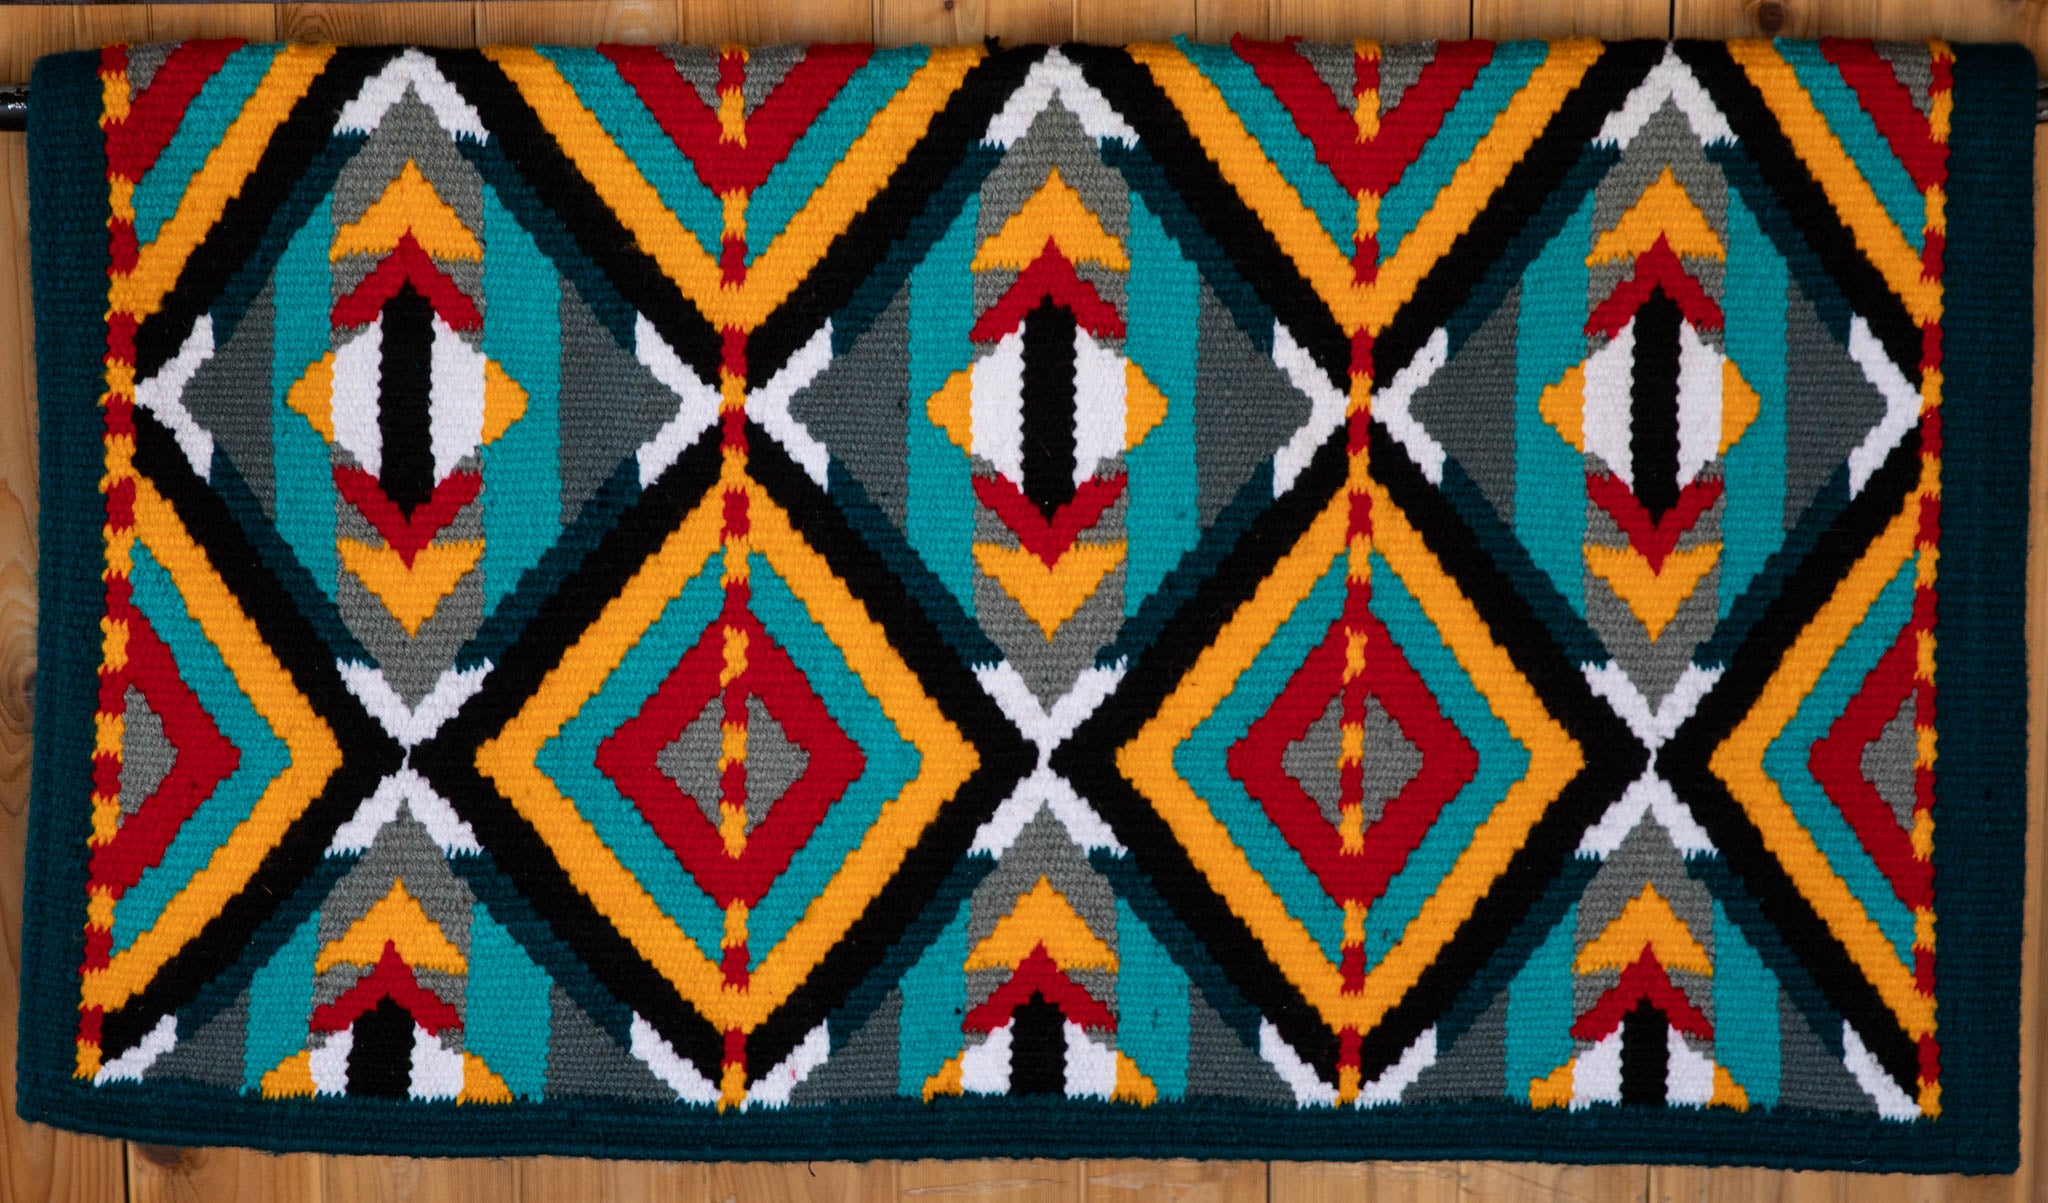 Black, Gray, Dark & Light Teal, Yellow, Red w/ White Accents Flat Show Blanket